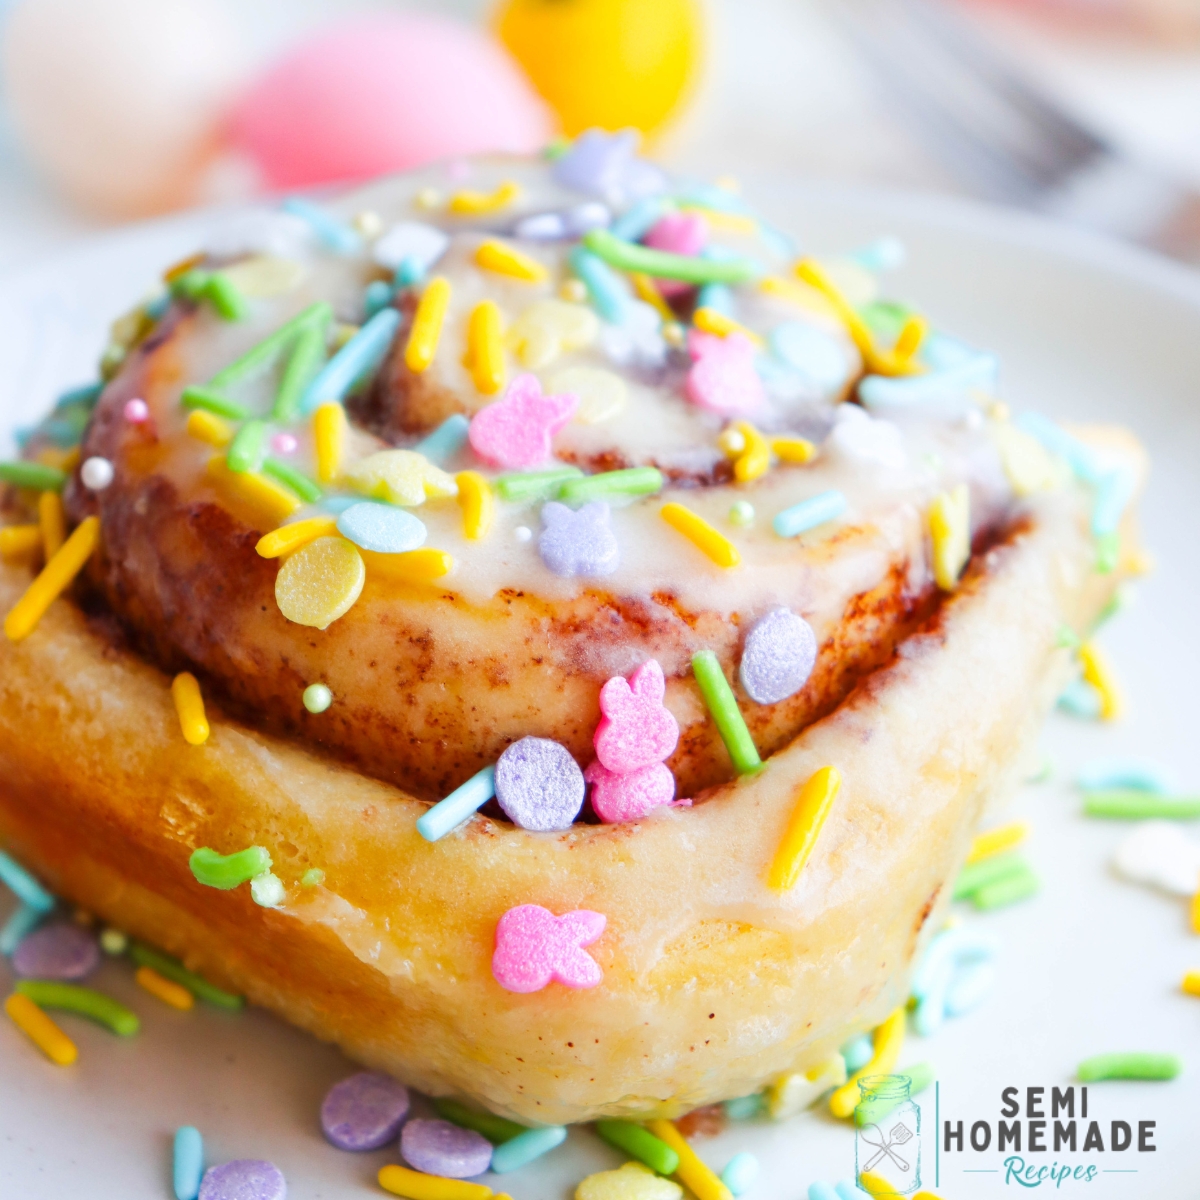 Discover the mouth-watering secret to making the most decadent Easter cinnamon rolls using a TikTok hack involving heavy cream. These taste just like Cinnabon Cinnamon rolls that you get from the mall!